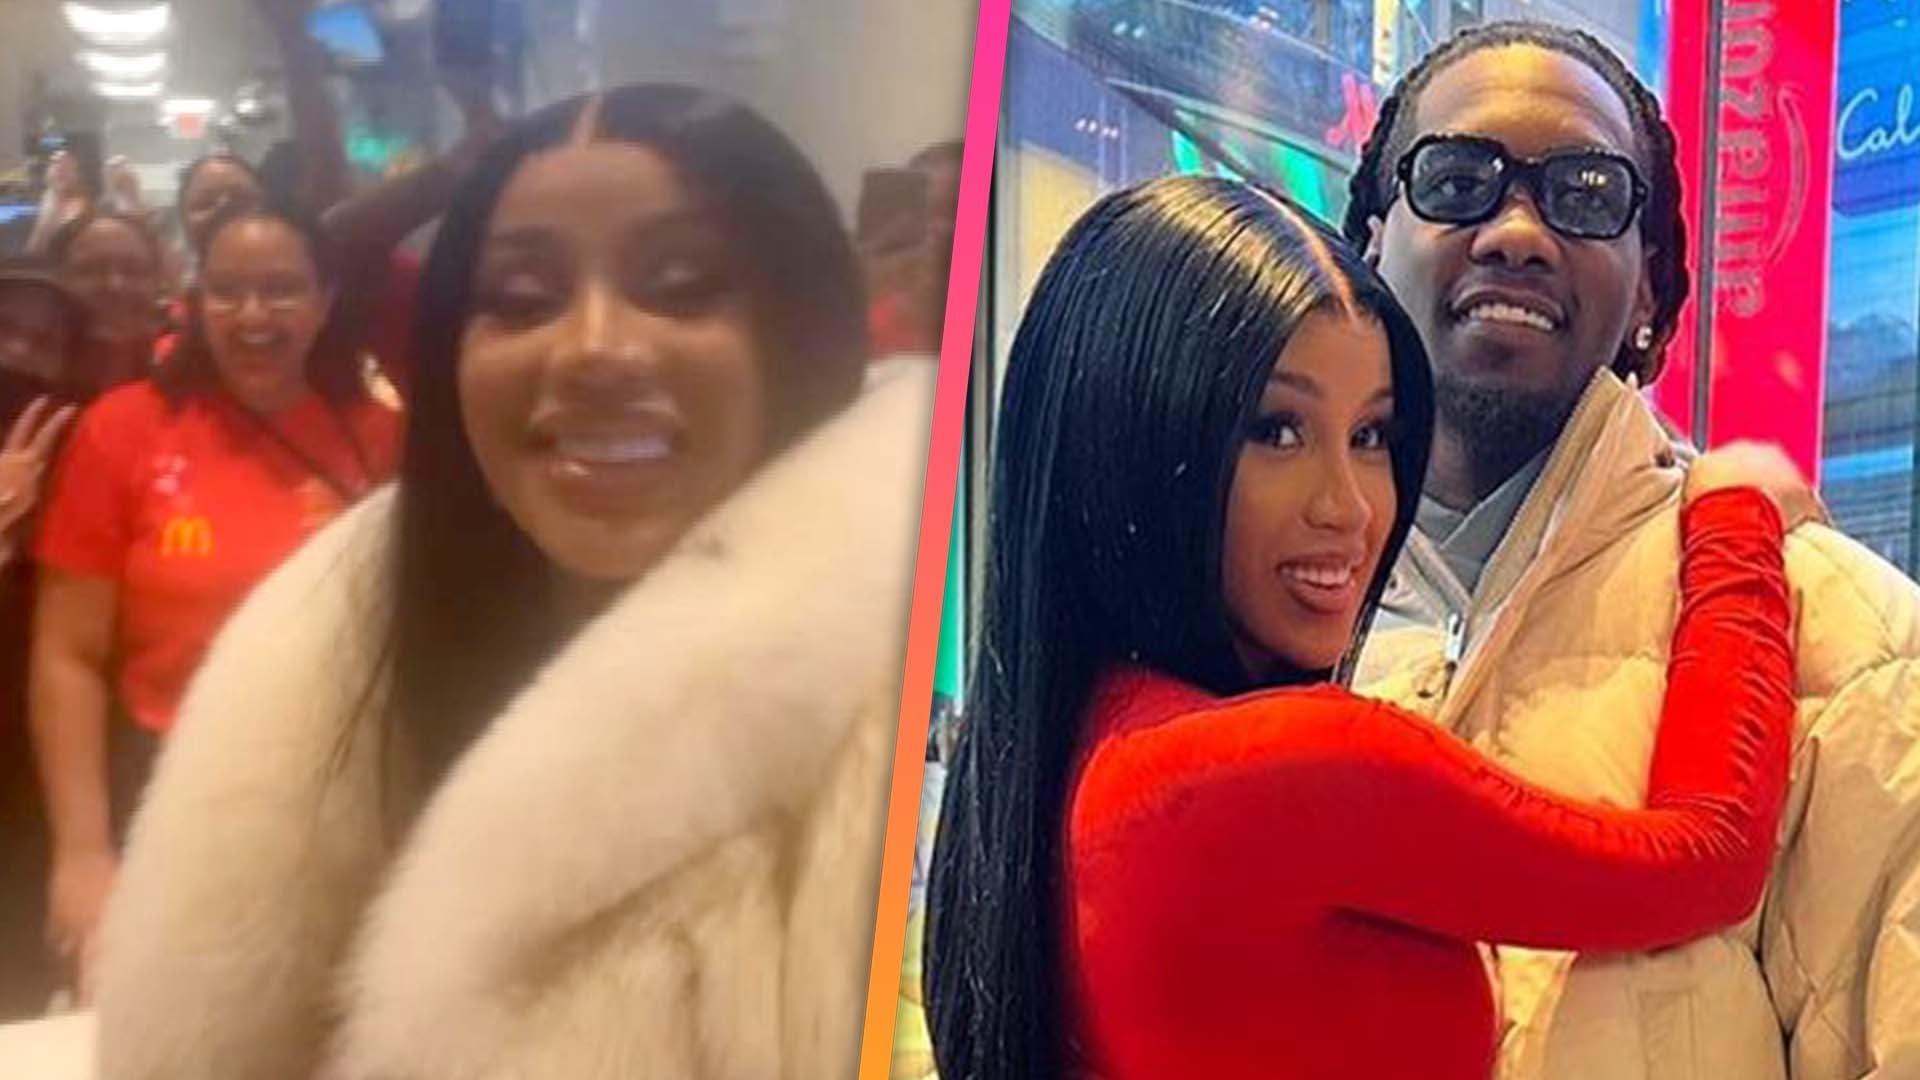 Cardi B and Offset SURPRISE Fans at Fast Food Restaurant on Valentine's Day